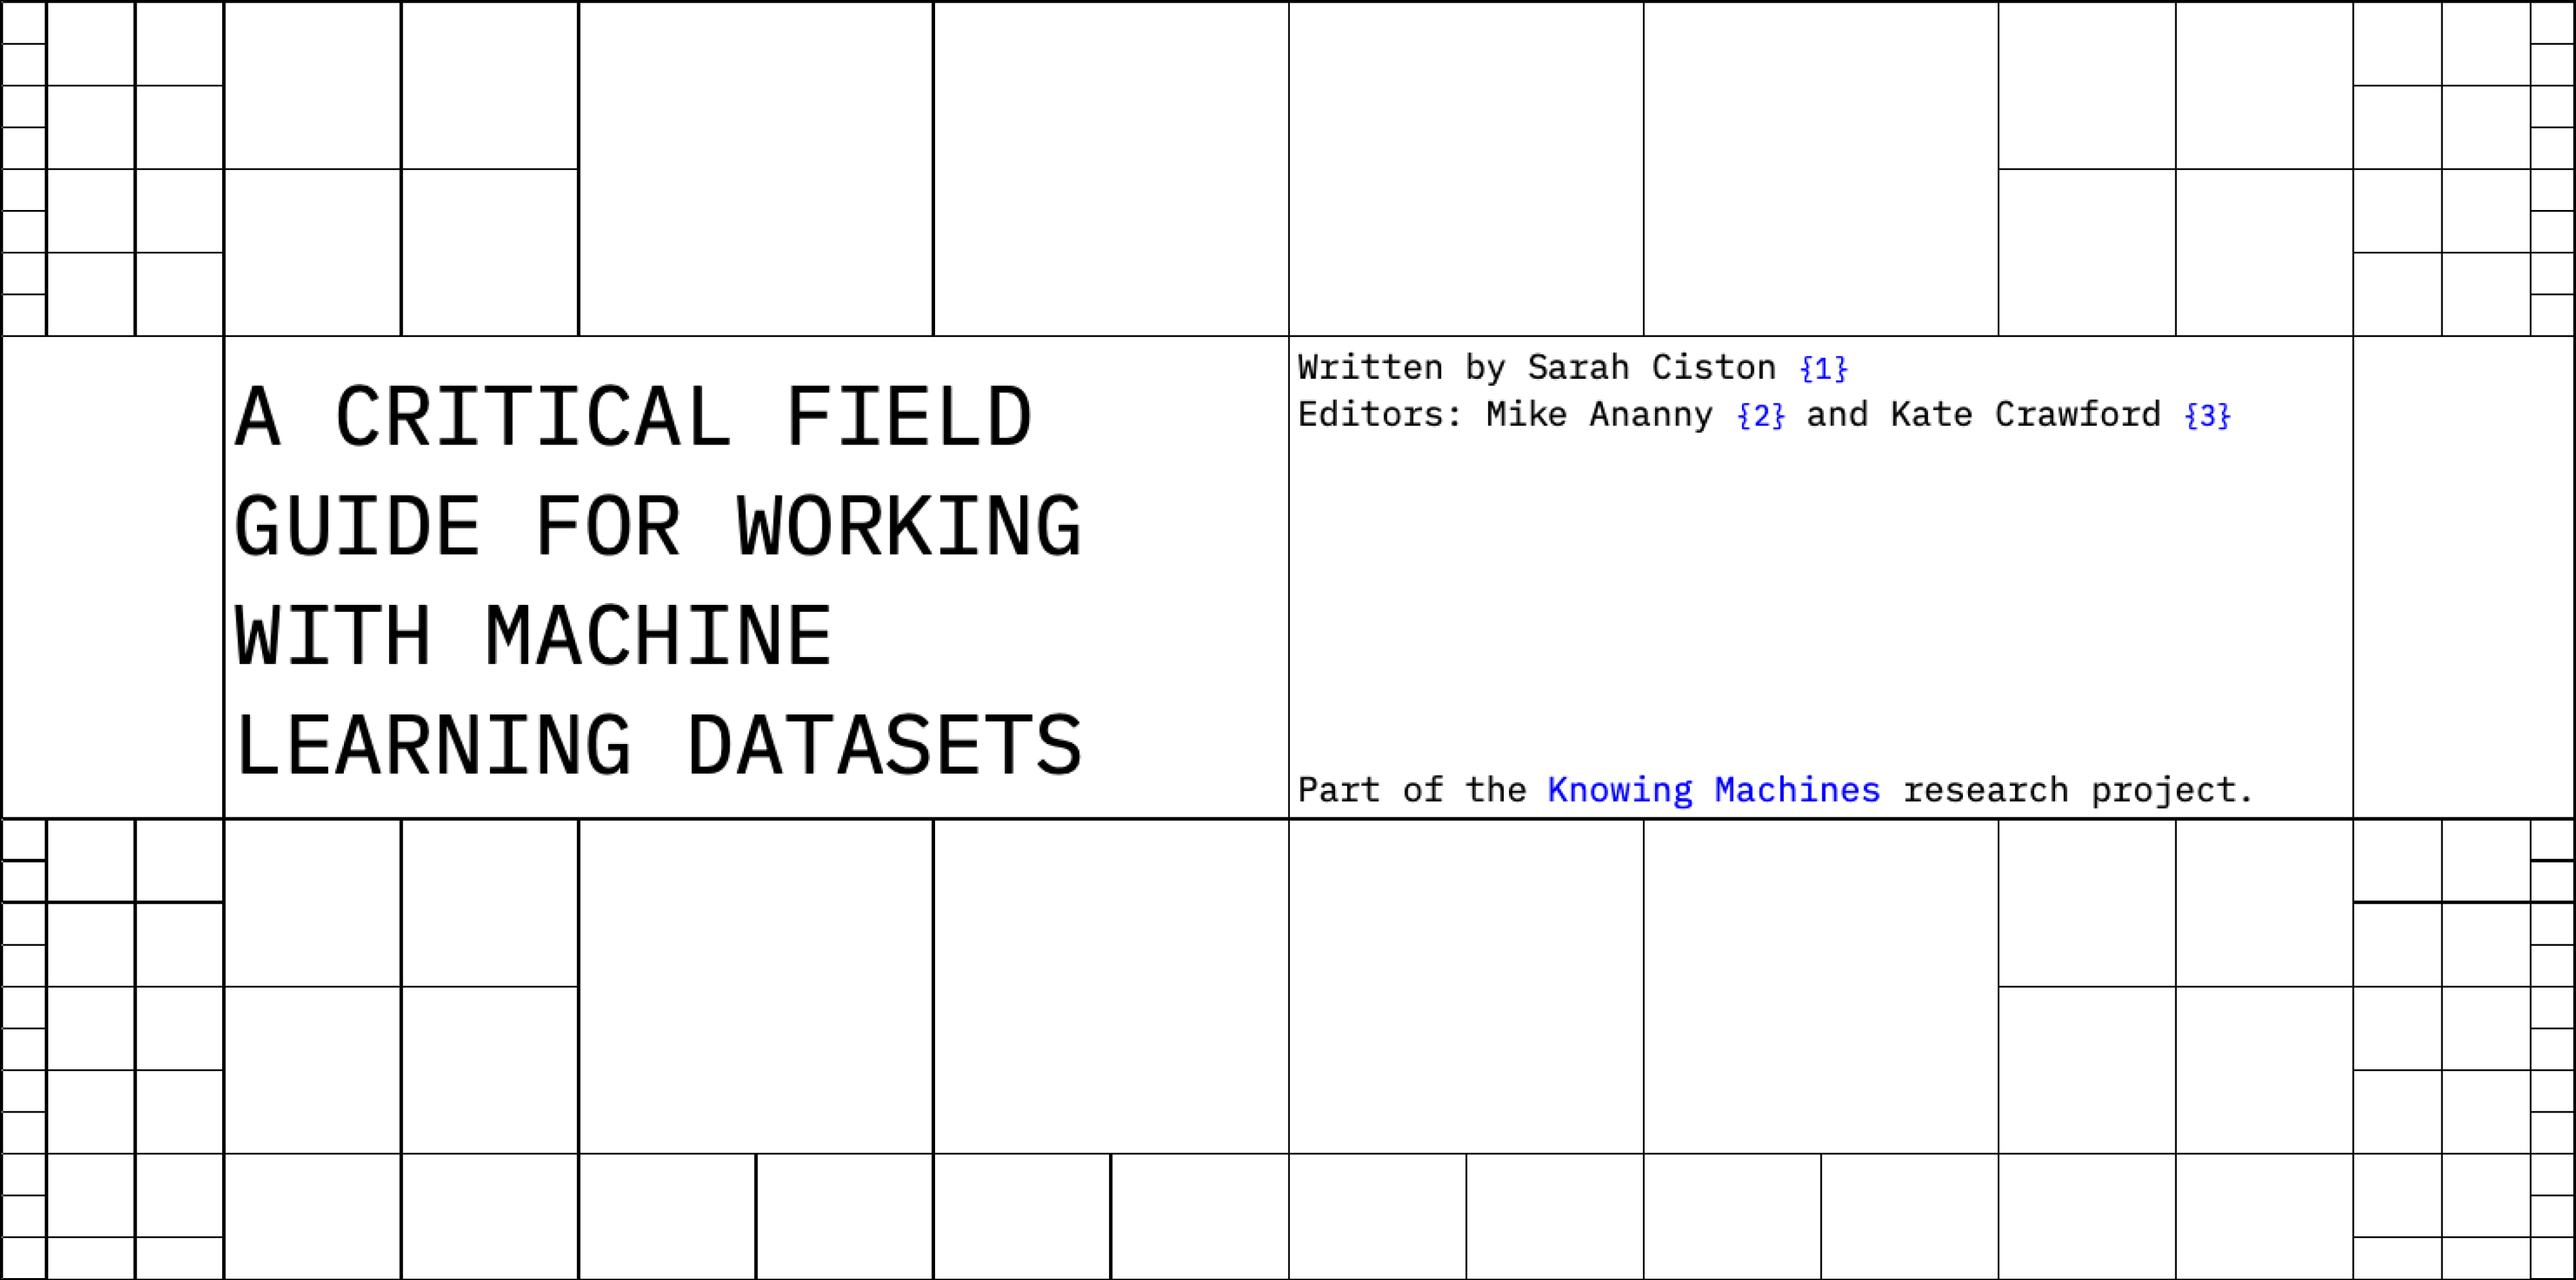 a-critical-field-guide-for-working-with-machine-learning-datasets